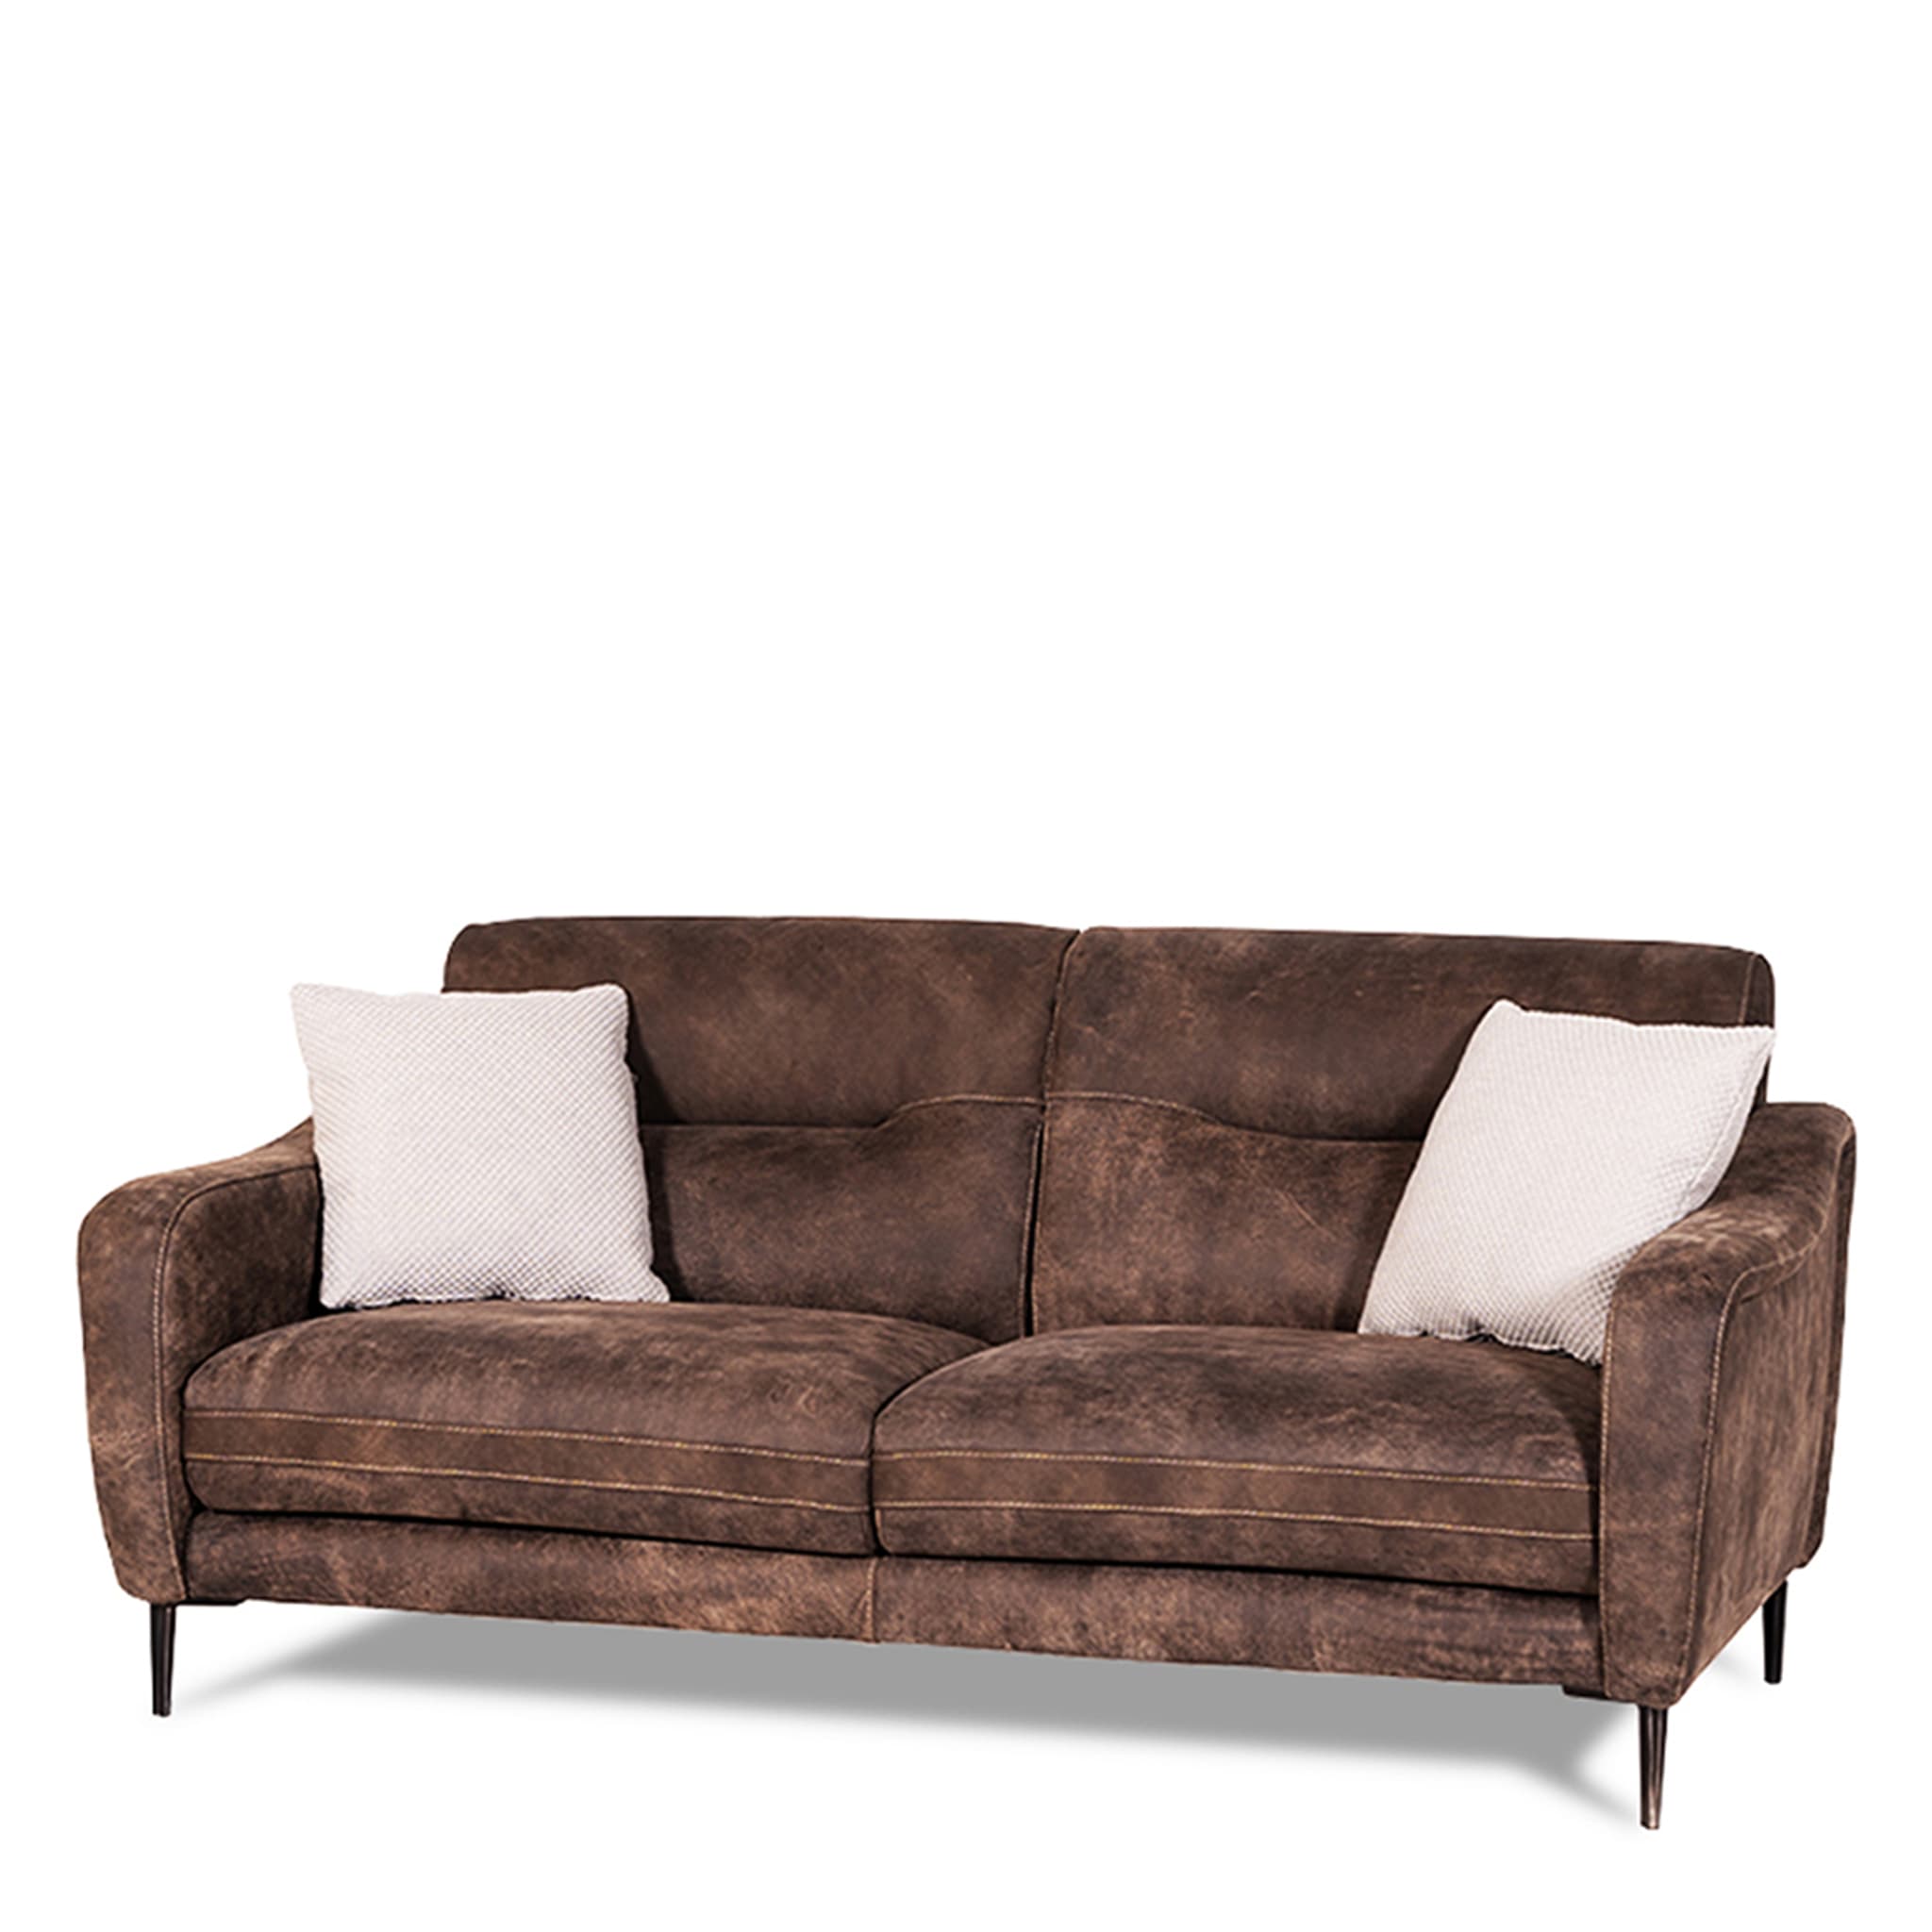 Fonzie Brown Leather 2-Seater Sofa Tribeca Collection - Alternative view 5